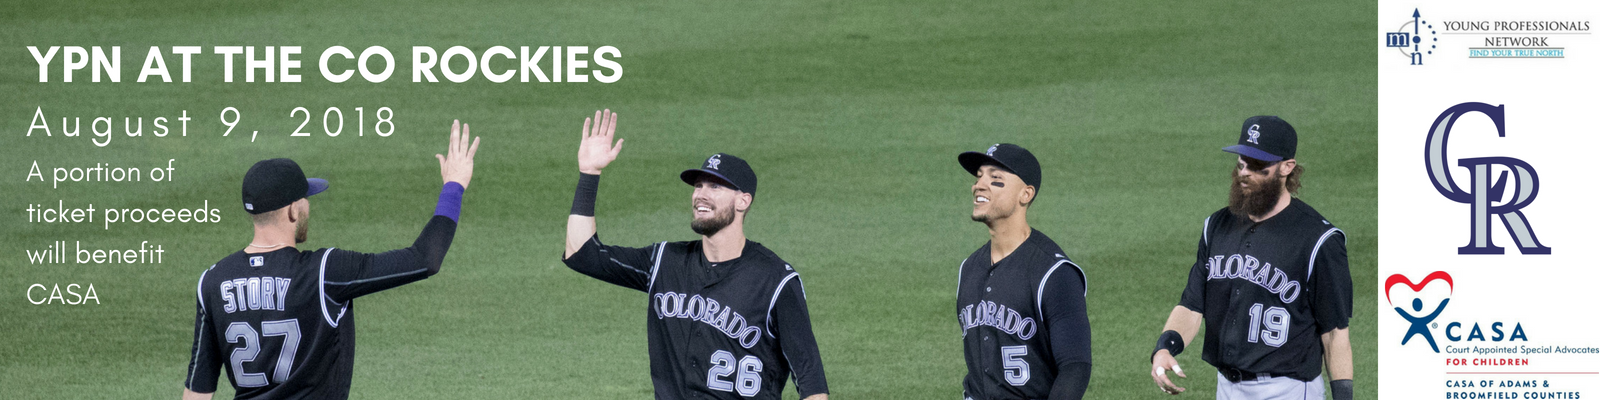 YPN-rockies-aug-2018-banner.png